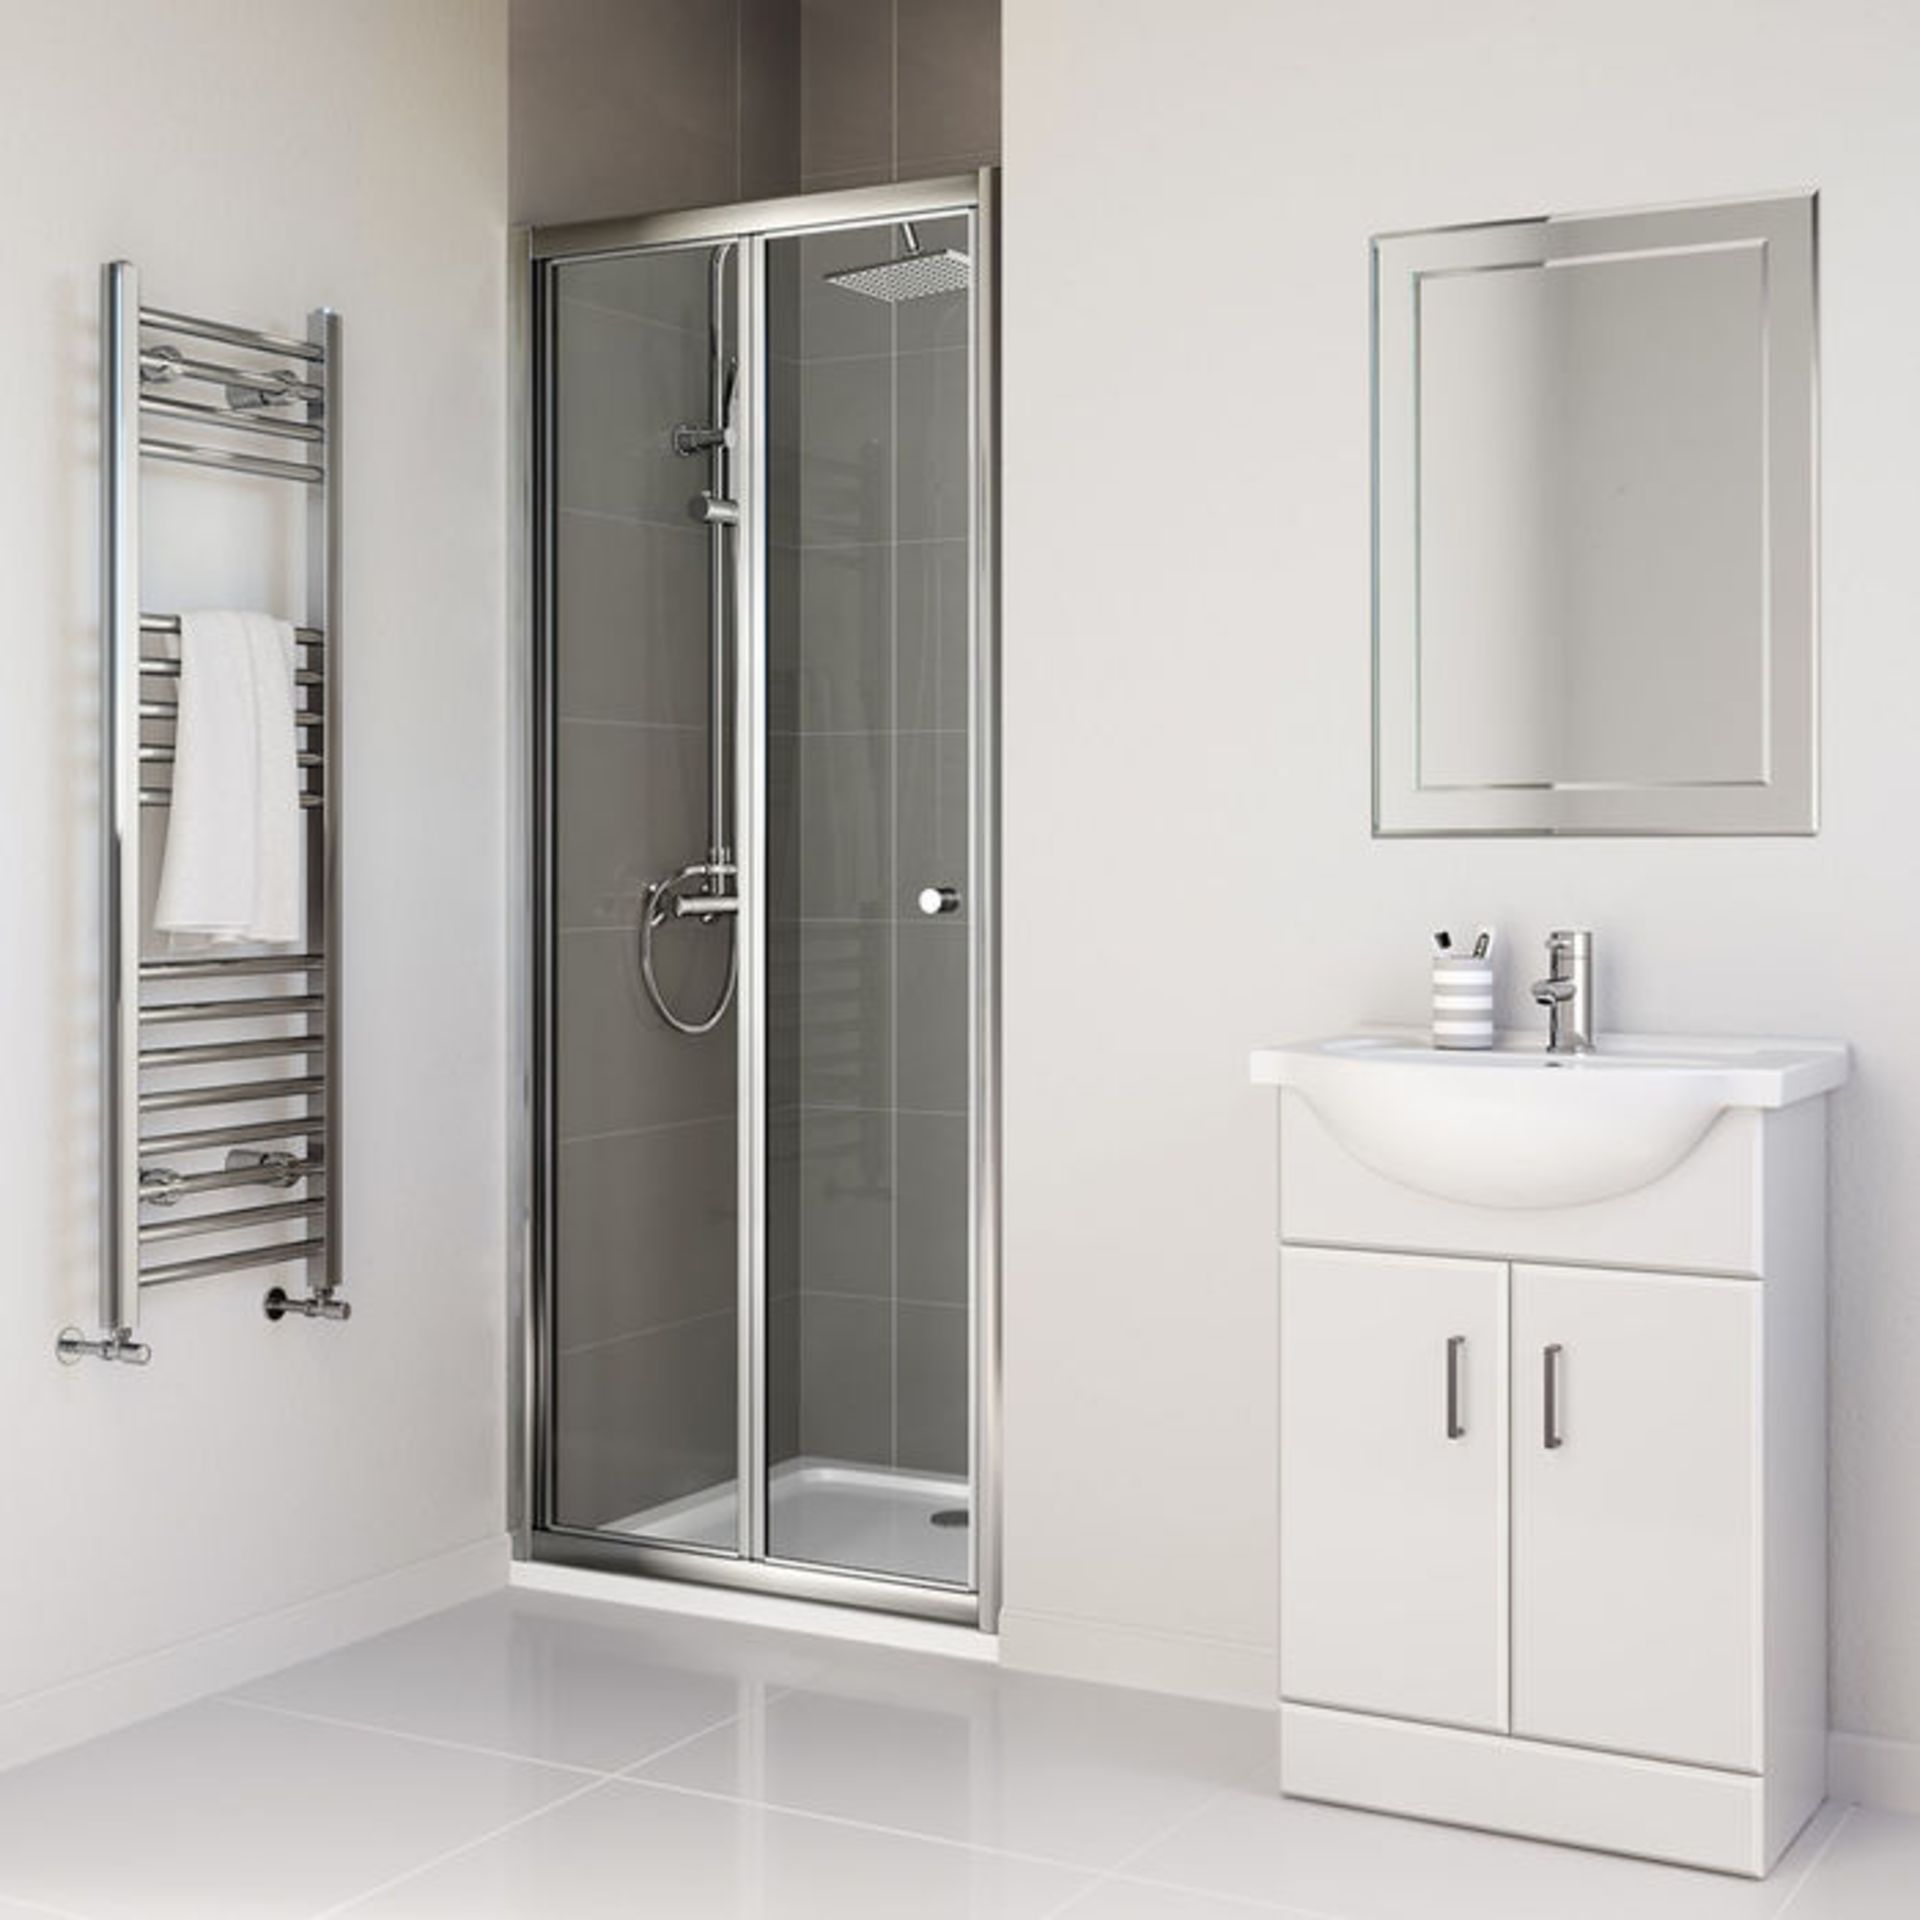 (H94) 700mm - Elements Bi Fold Shower Door 4mm Safety Glass Fully waterproof tested with cushioned - Image 3 of 4